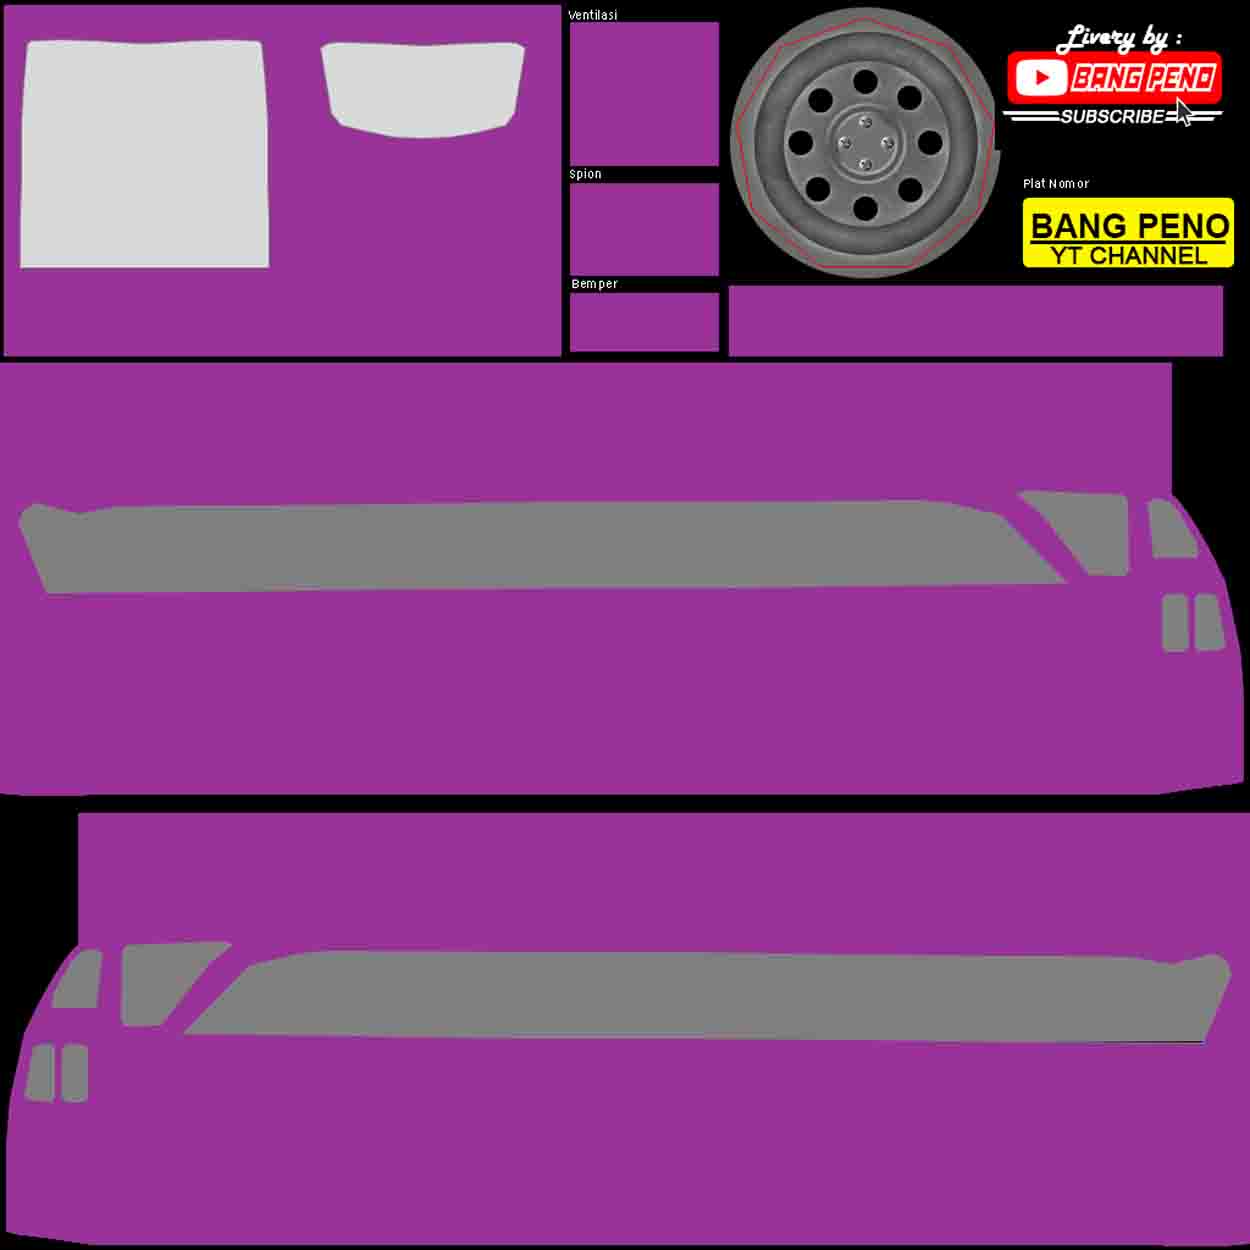 download livery bus polos